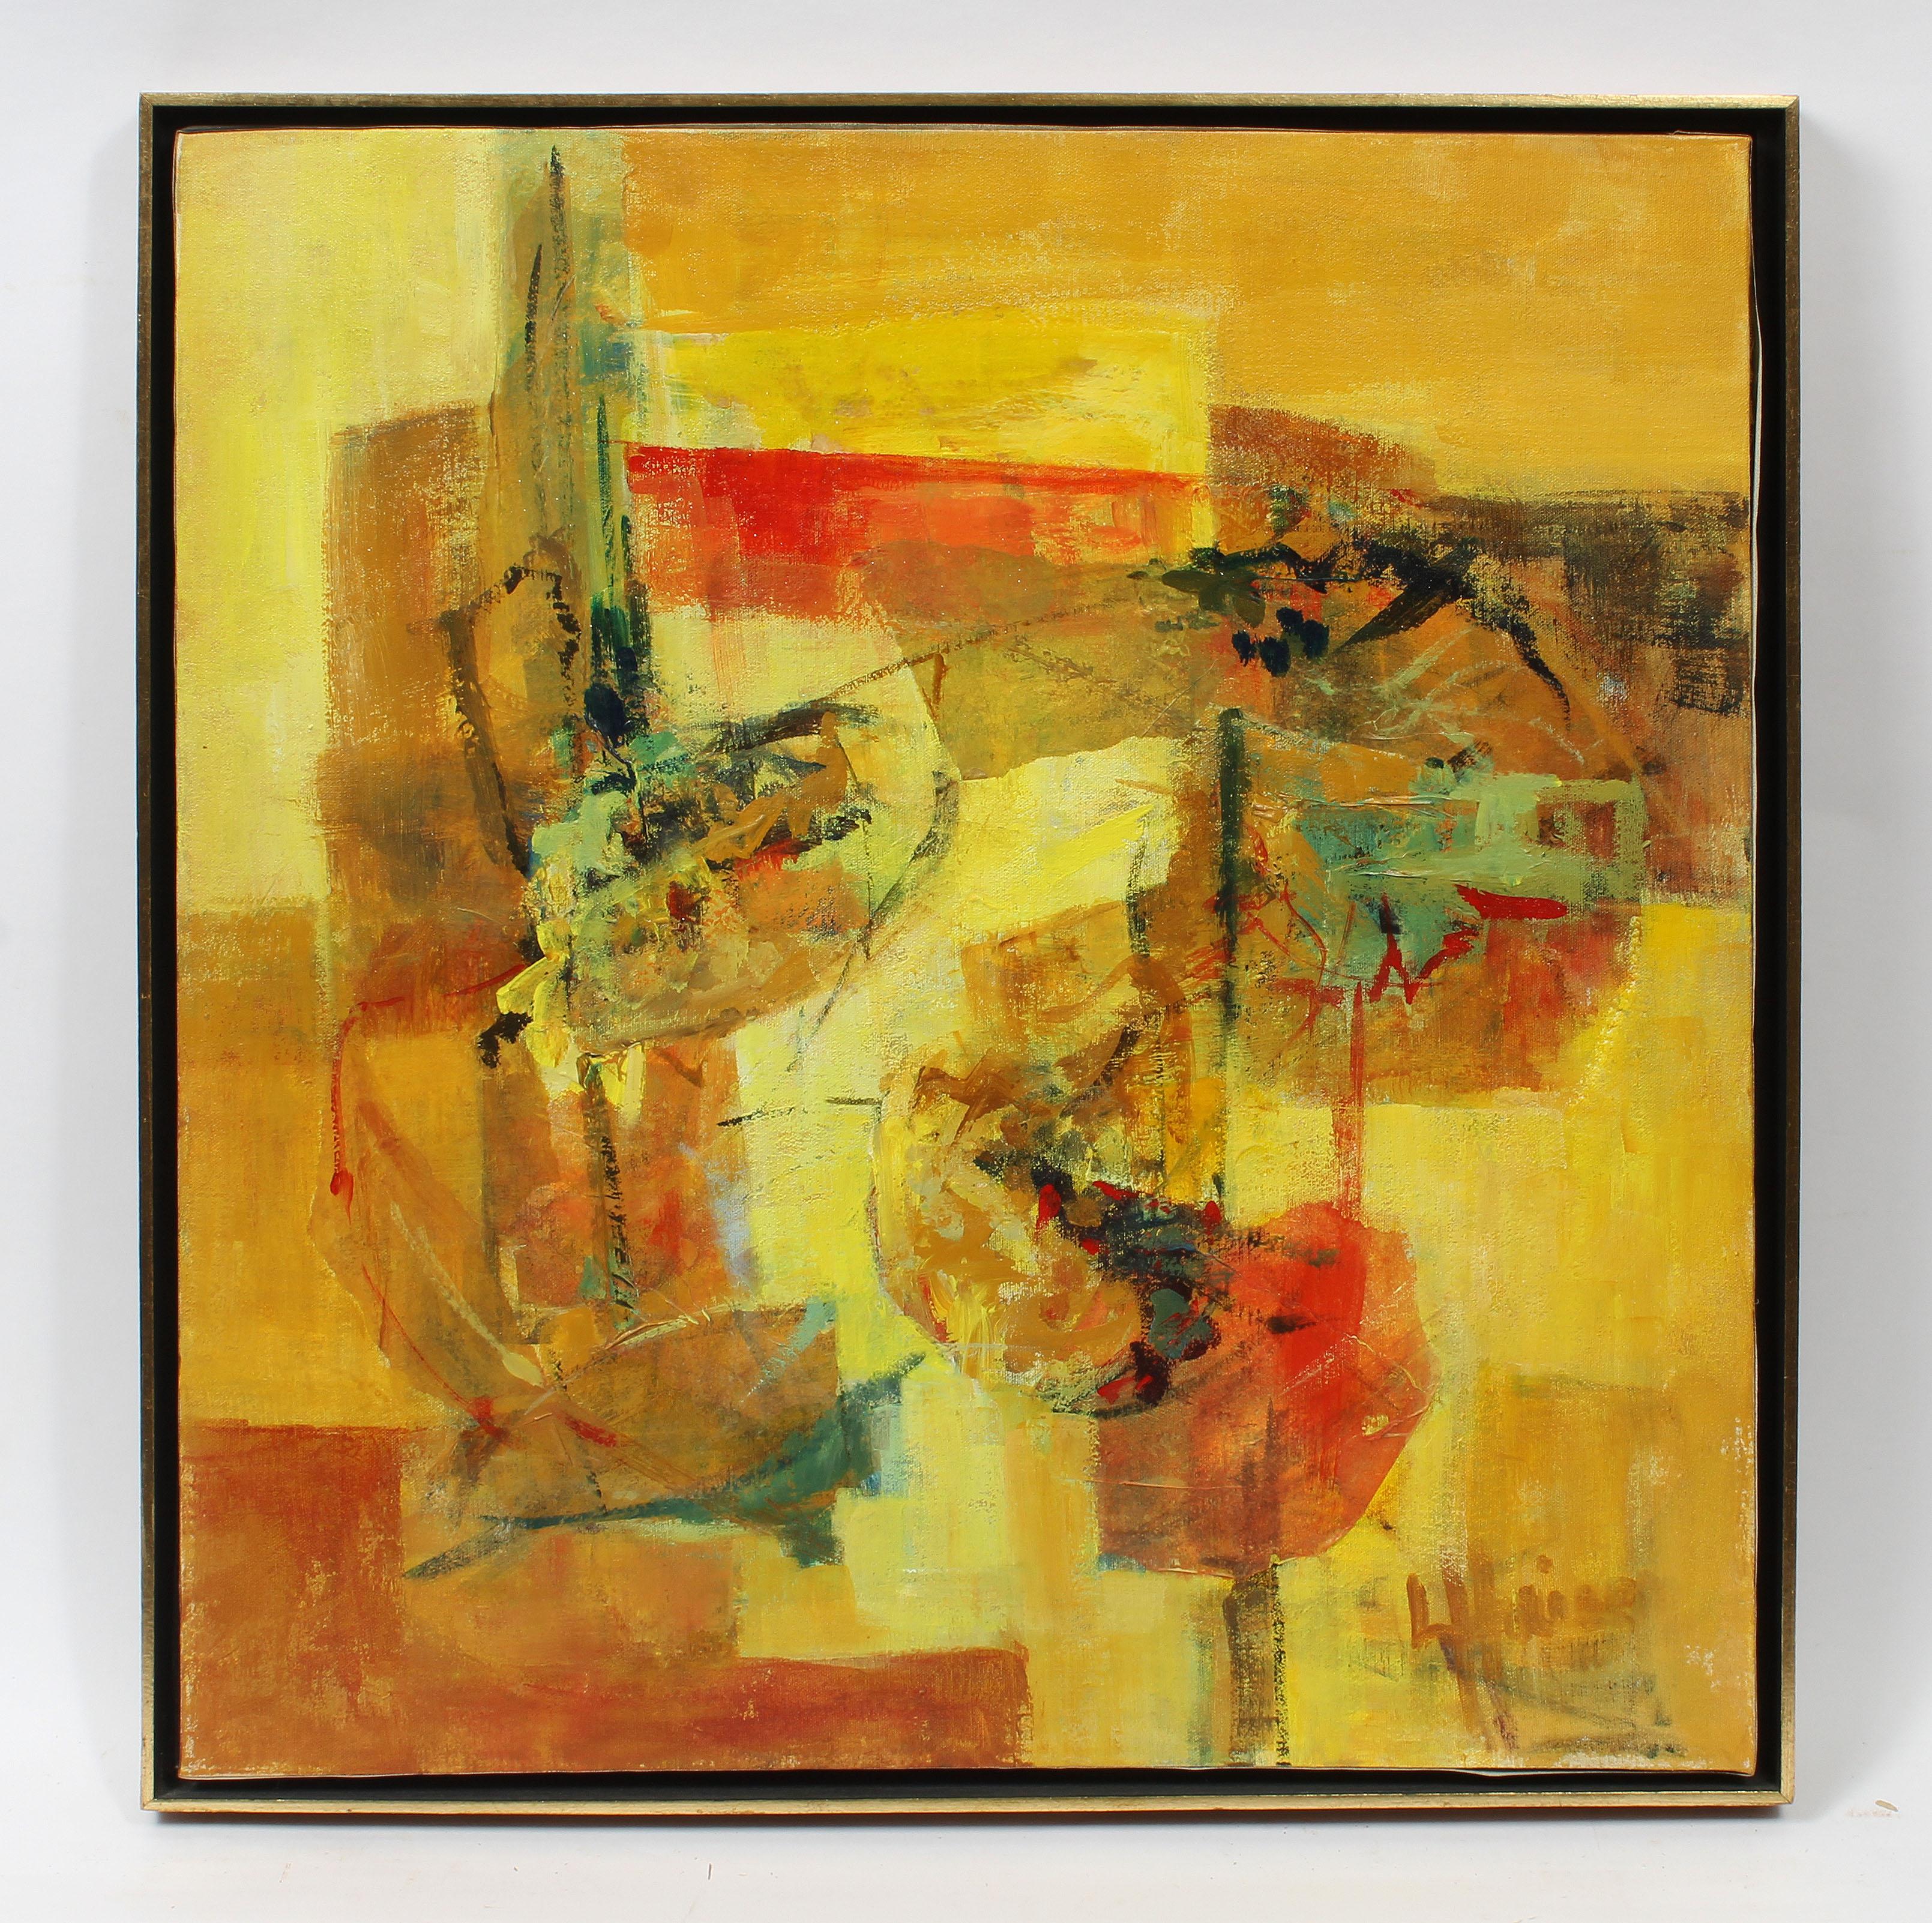 Antique American School New York Modern Abstract Expressionist Oil Painting - Orange Abstract Painting by Unknown